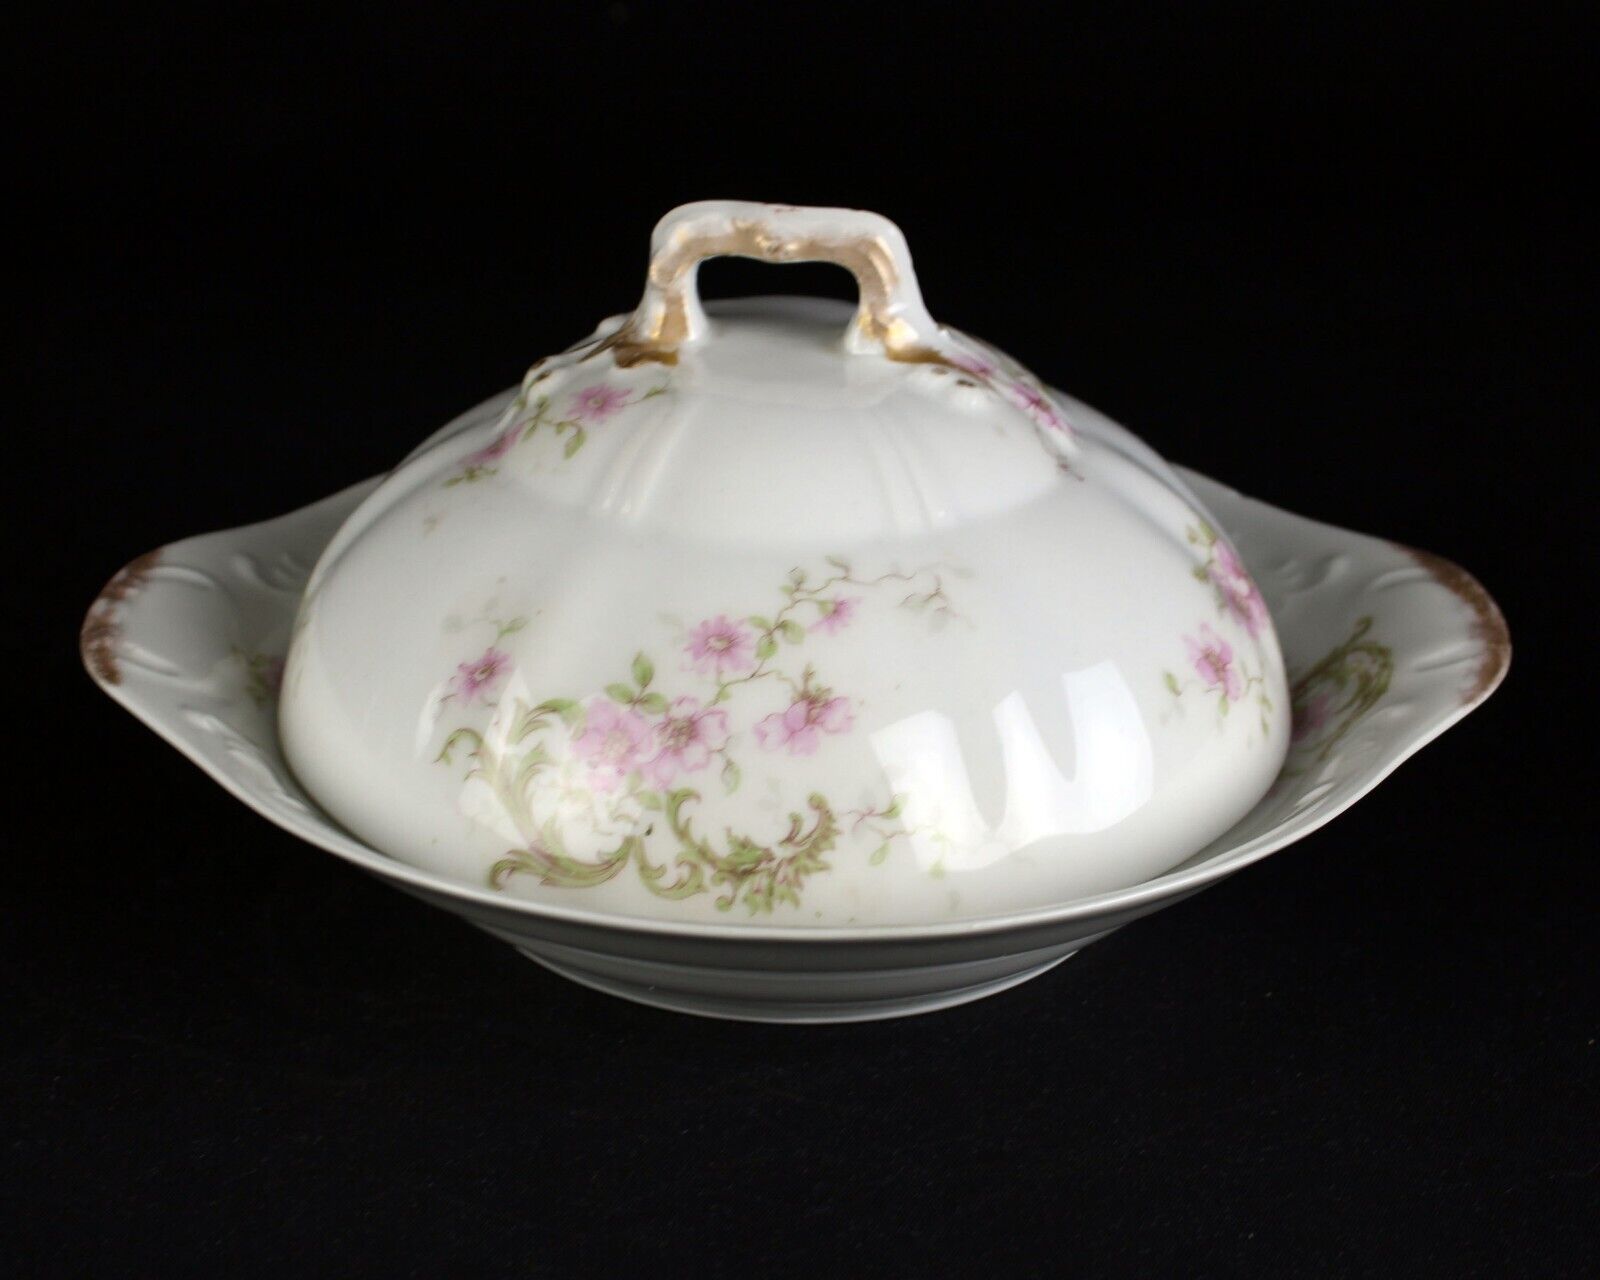 Primary image for Theodore Haviland Pink Roses Green Scroll Butter Dish w Strainer, Schleiger 144B